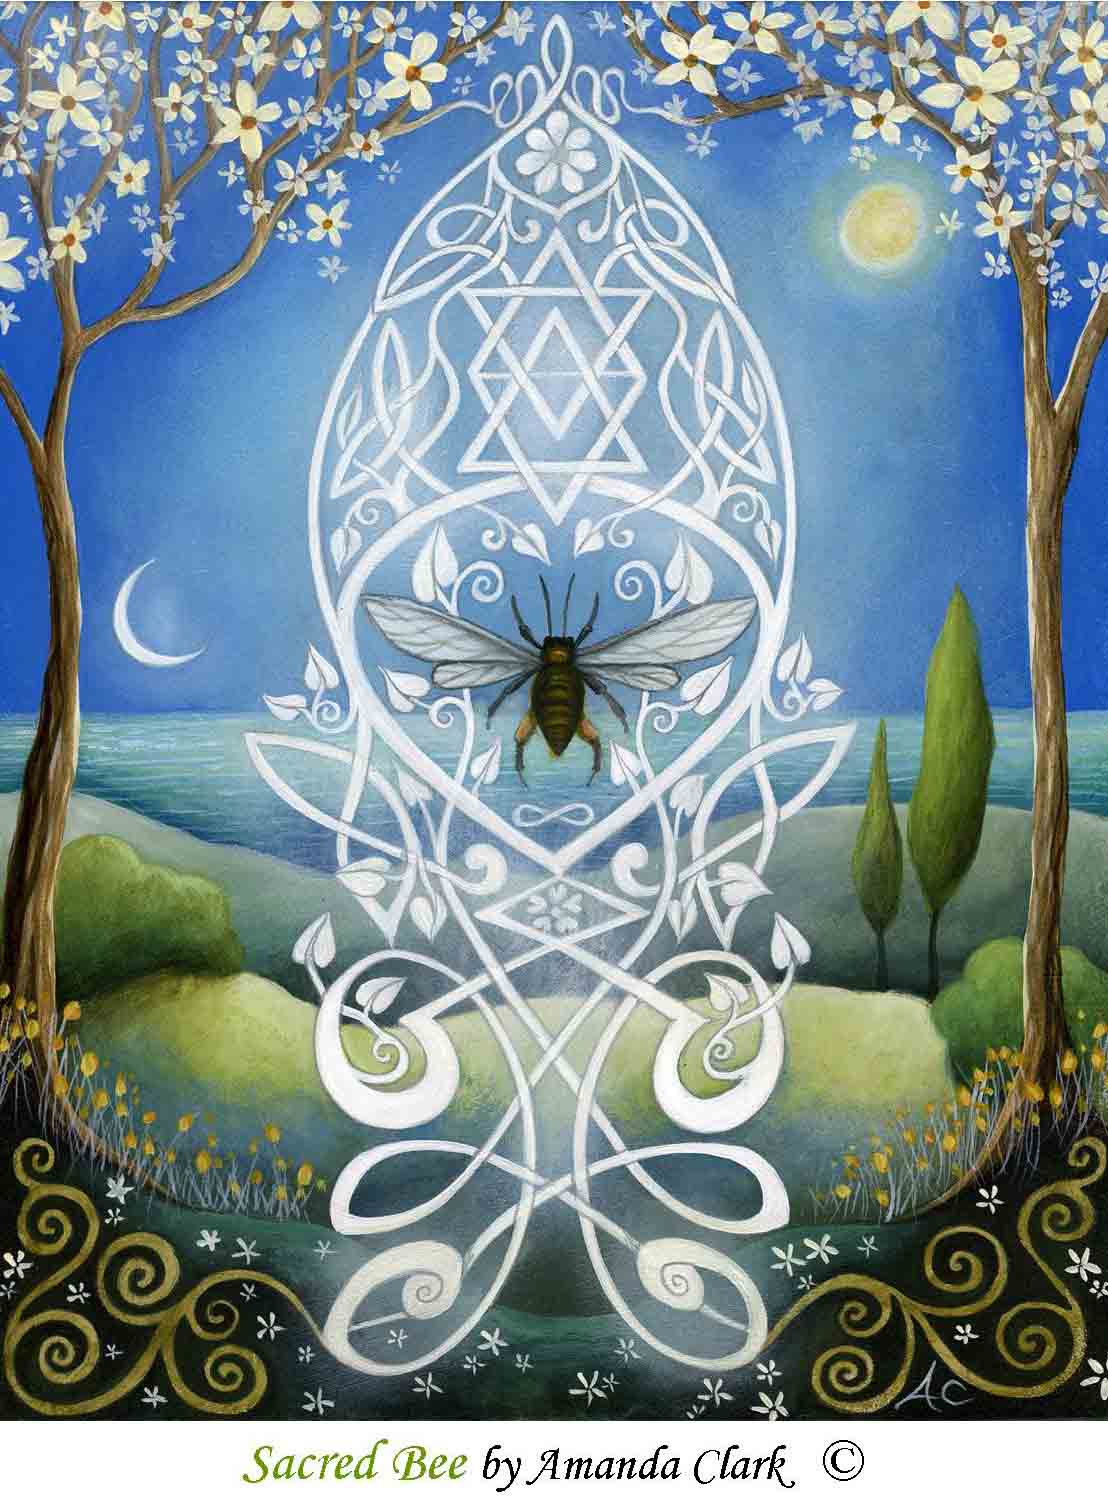 Earth Angels Art Art And Illustrations By Amanda Clark The Shaman The Honeybee And Legend